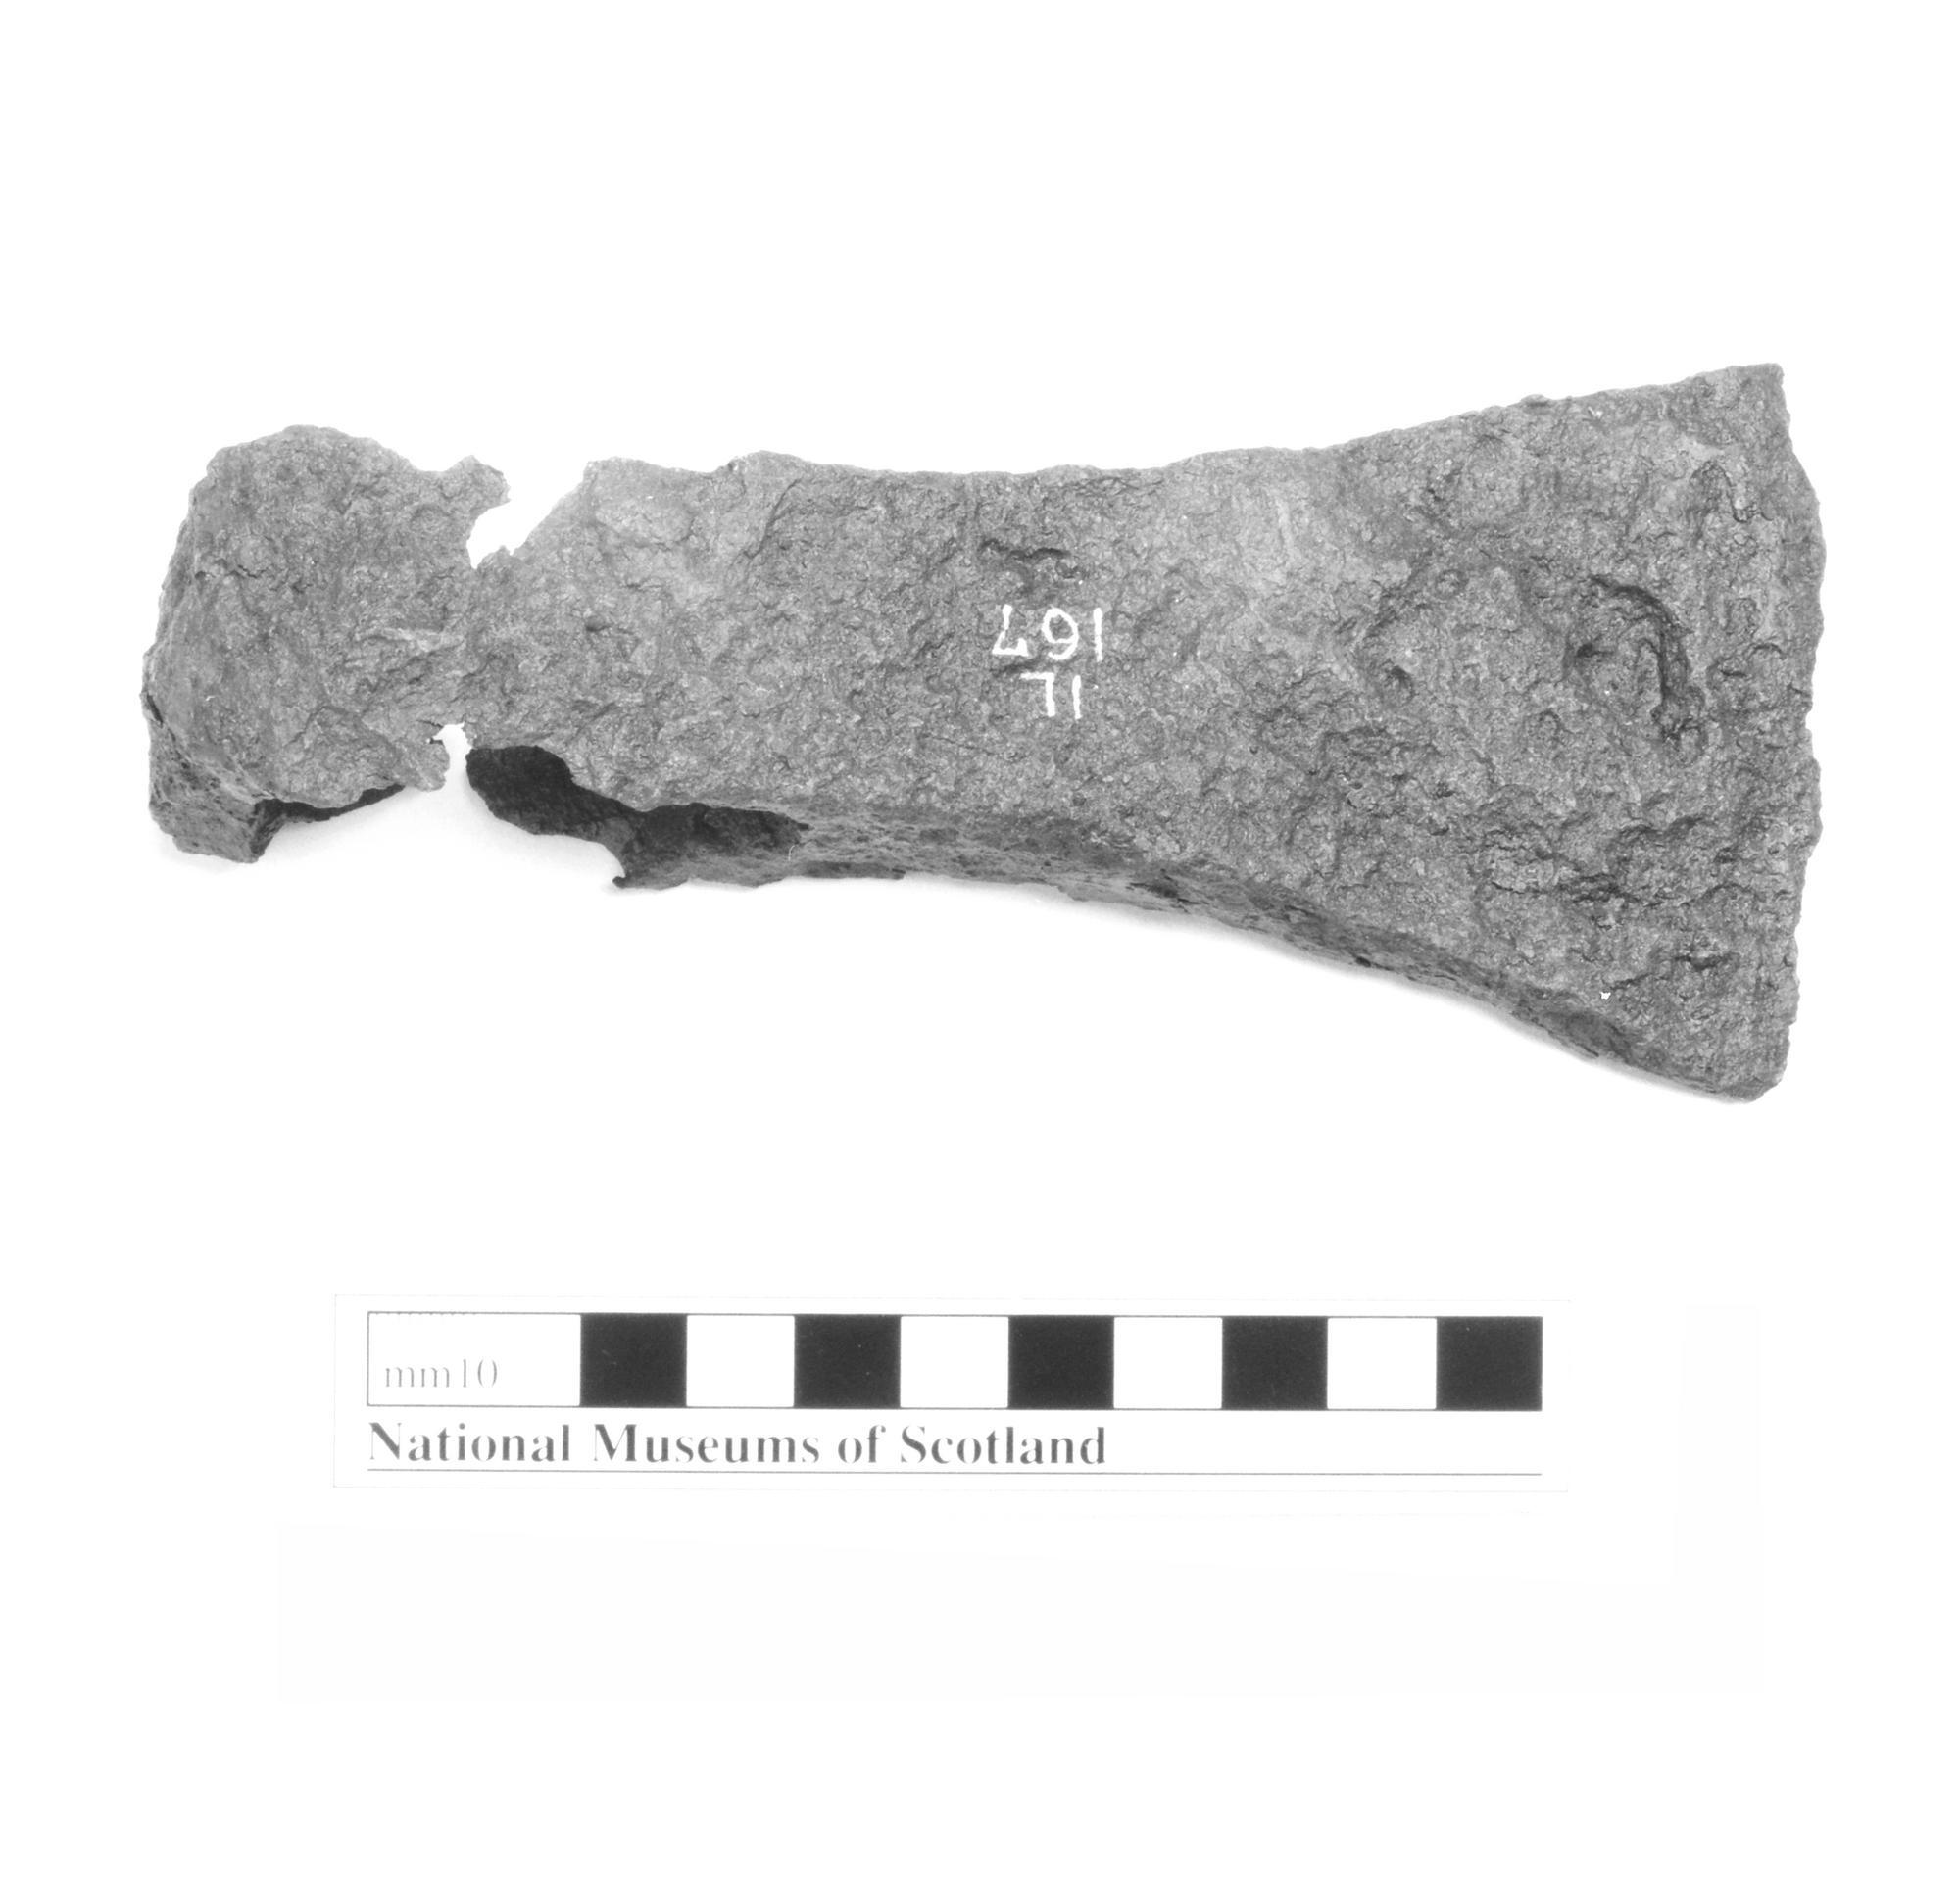 Image of Iron axe head of Viking type from Eigg, 9th - 12th century © National Museums Scotland